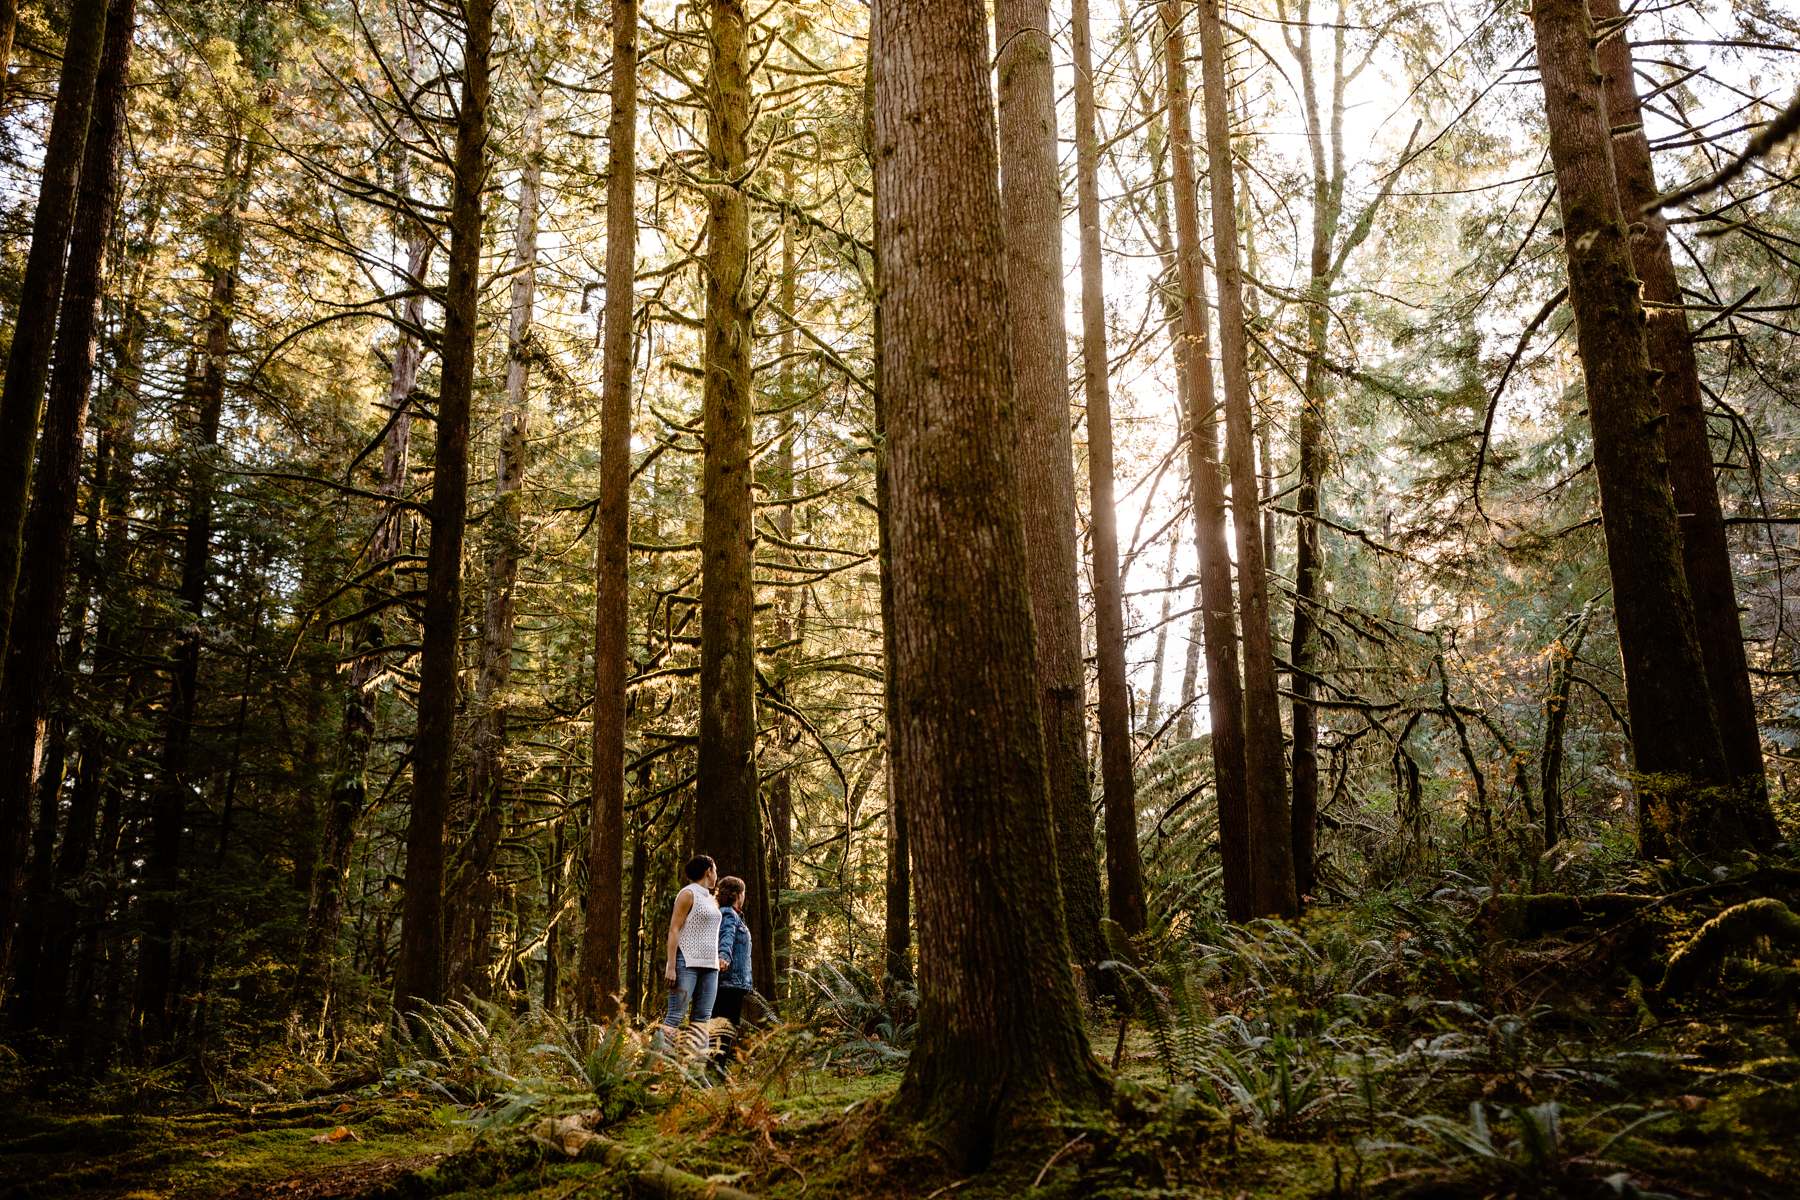 Vancouver wedding photographers at Golden Ears Provincial Park for LGBTQ engagement photography session